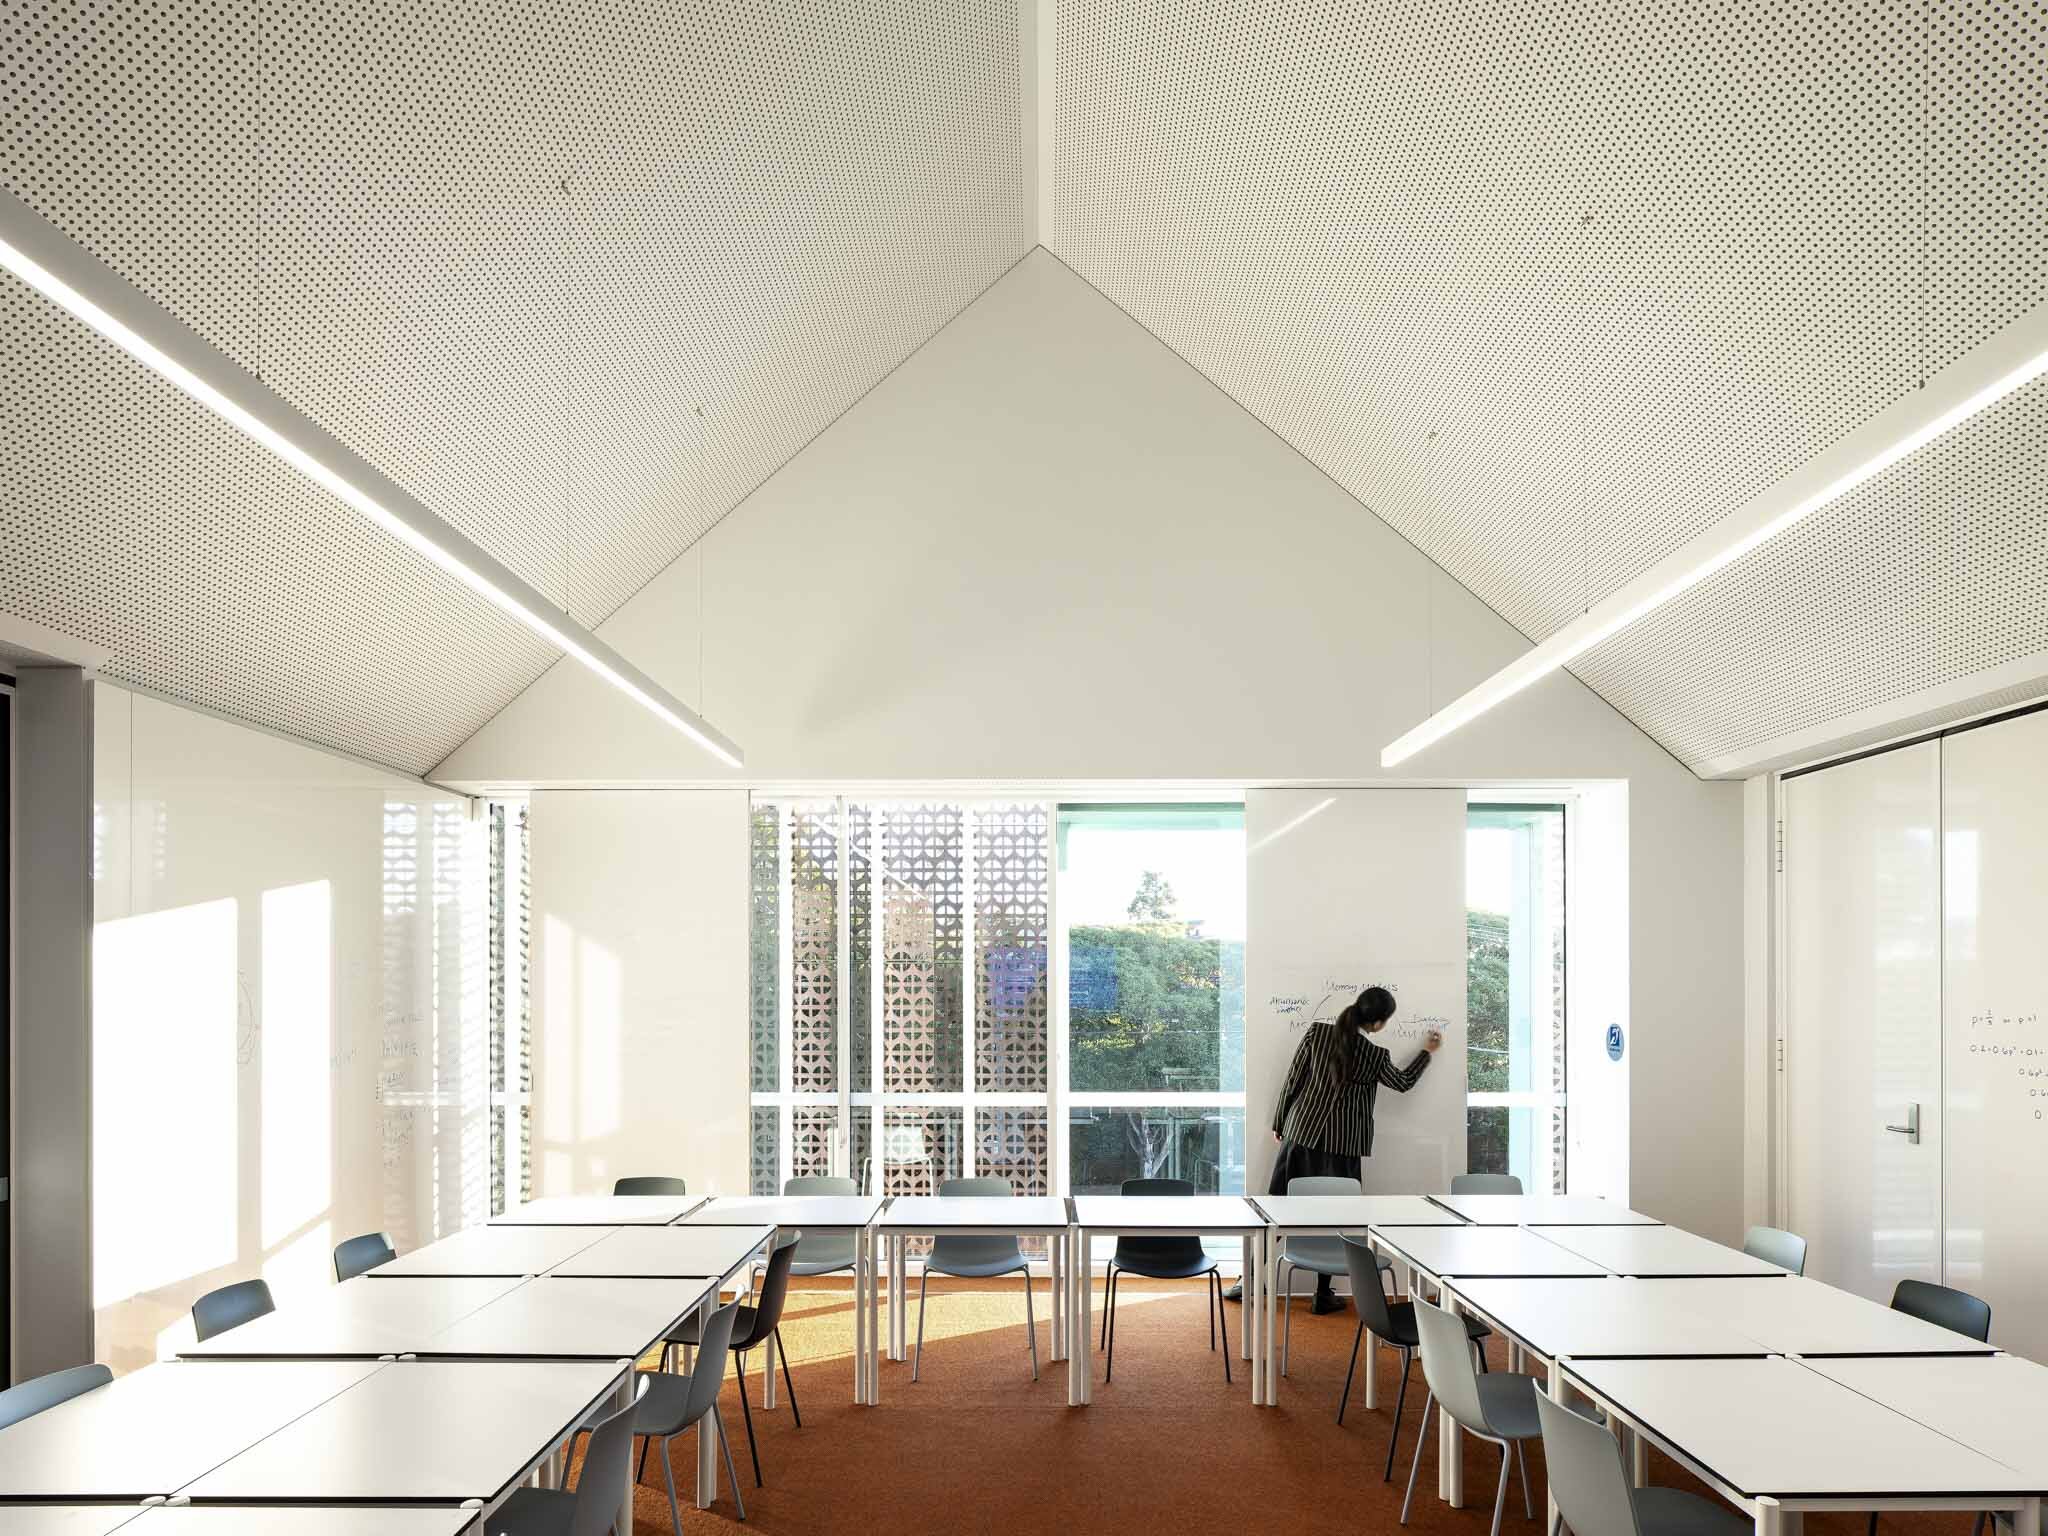 Ravenswood Senior Learning Centre by BVN Architecture